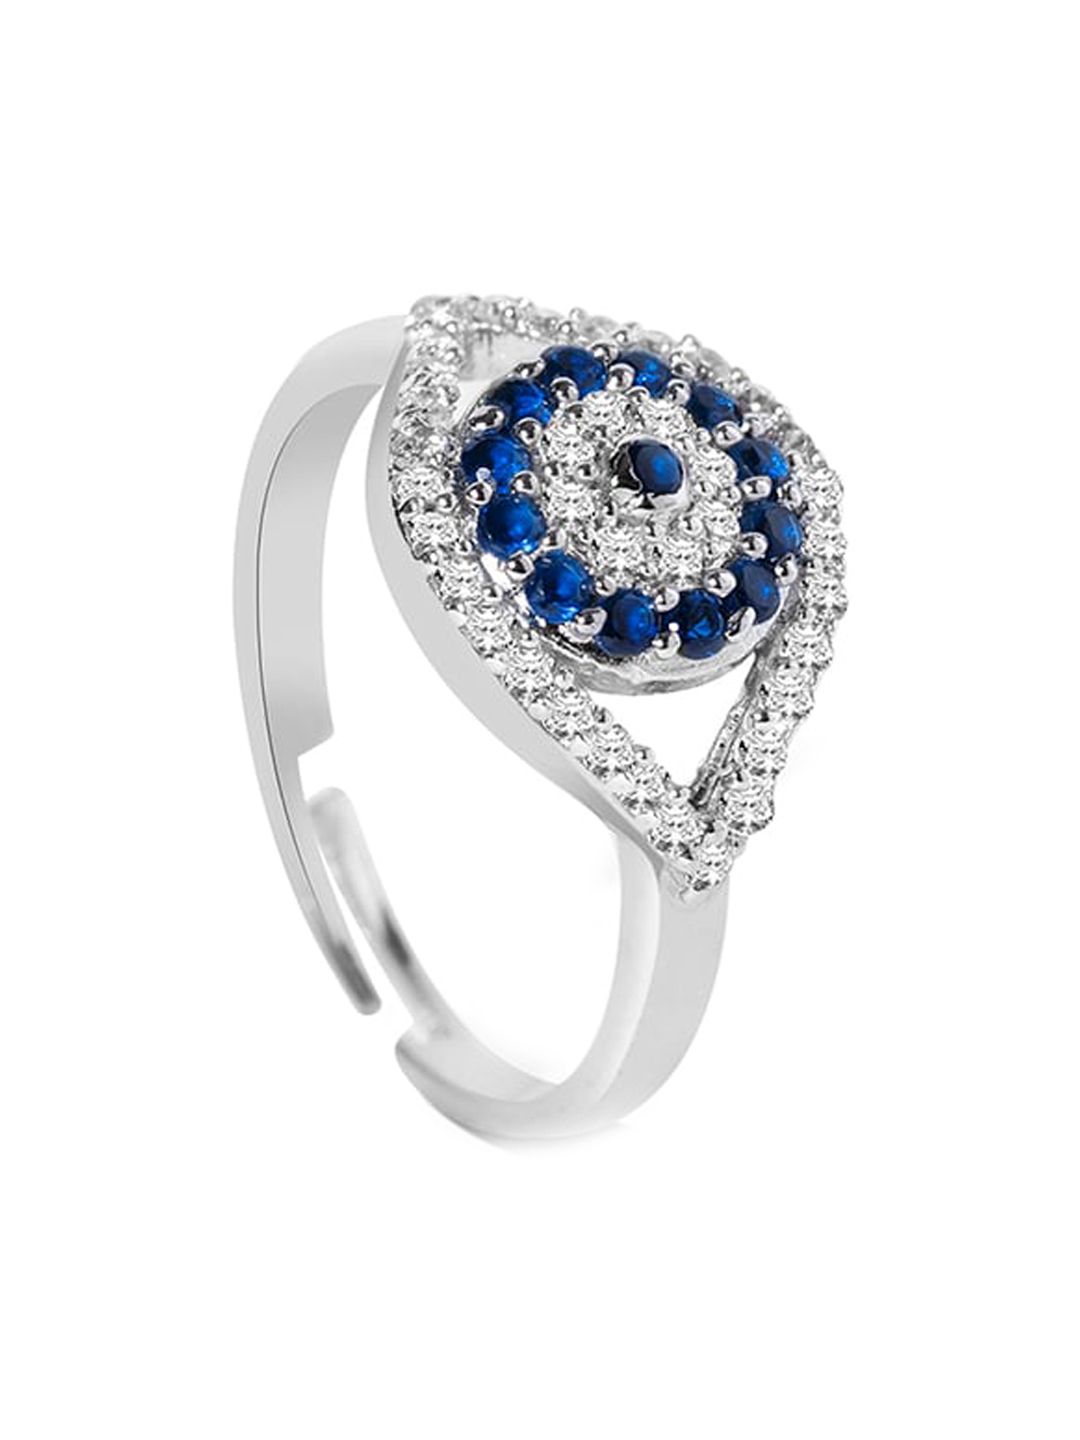 Mikoto by FableStreet Rhodium-Plated Silver-Toned & Blue CZ-Studded Finger Ring Price in India